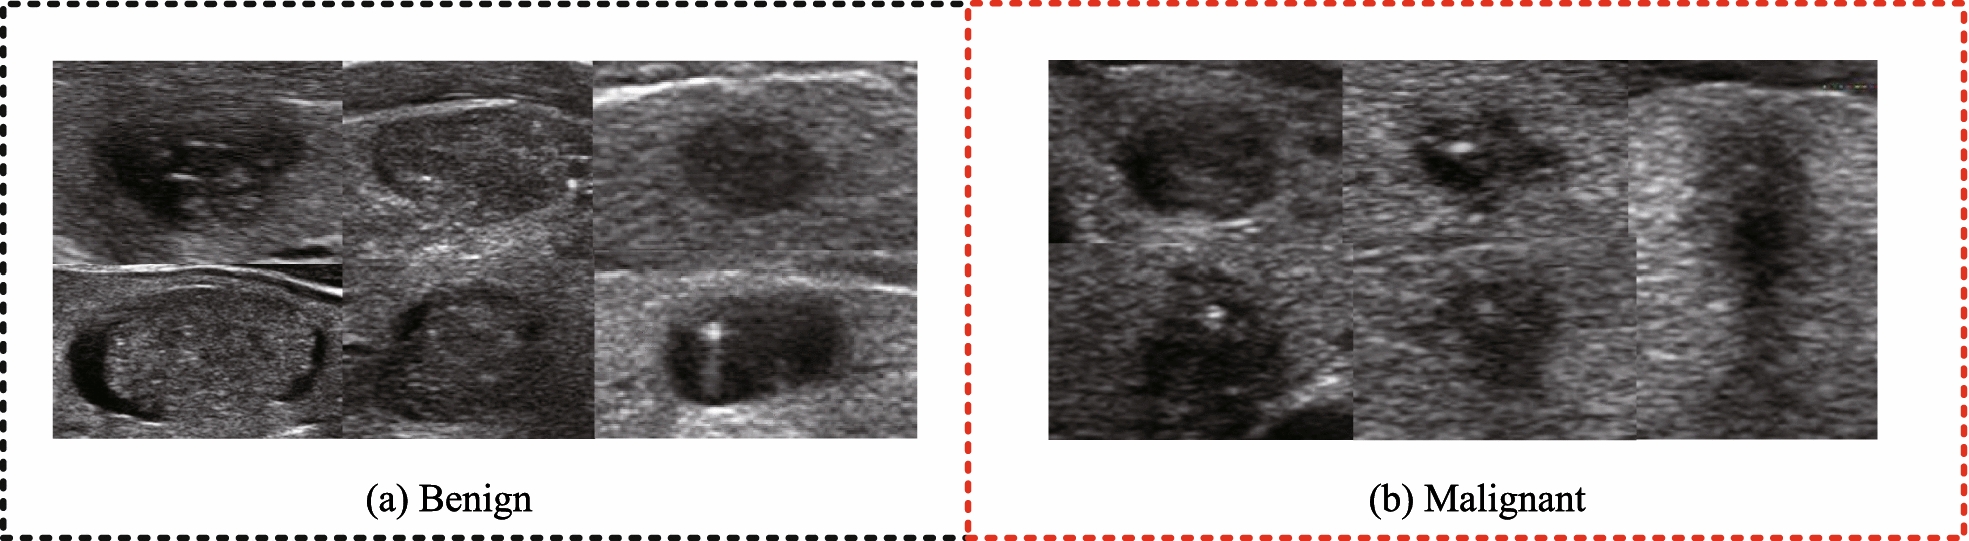 Identification method of thyroid nodule ultrasonography based on self-supervised learning dual-branch attention learning framework